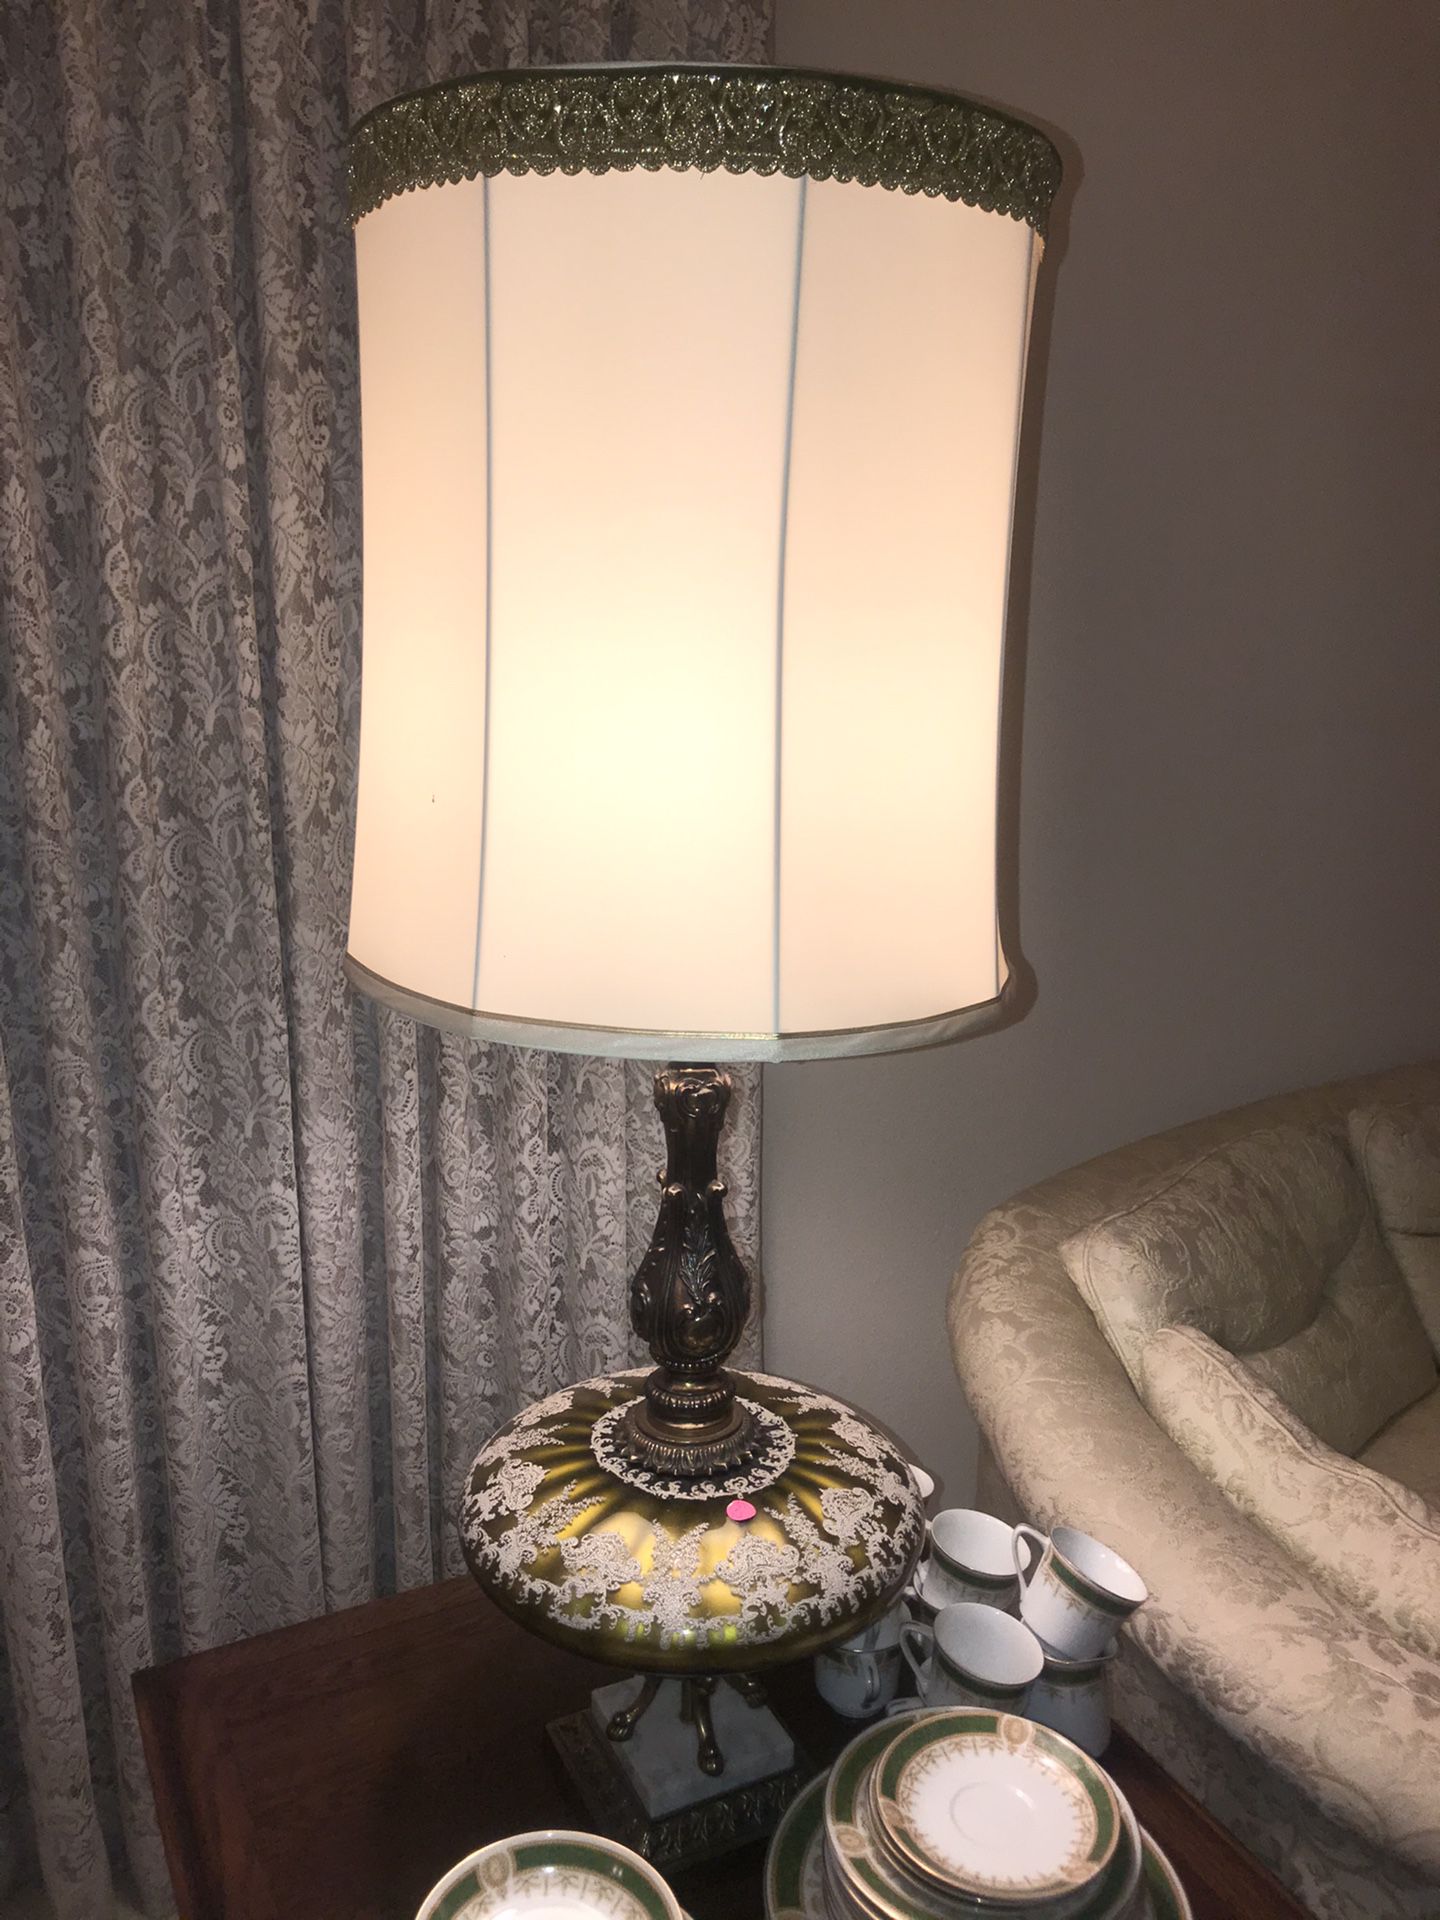 Beautiful set of vintage lamps $150 for both